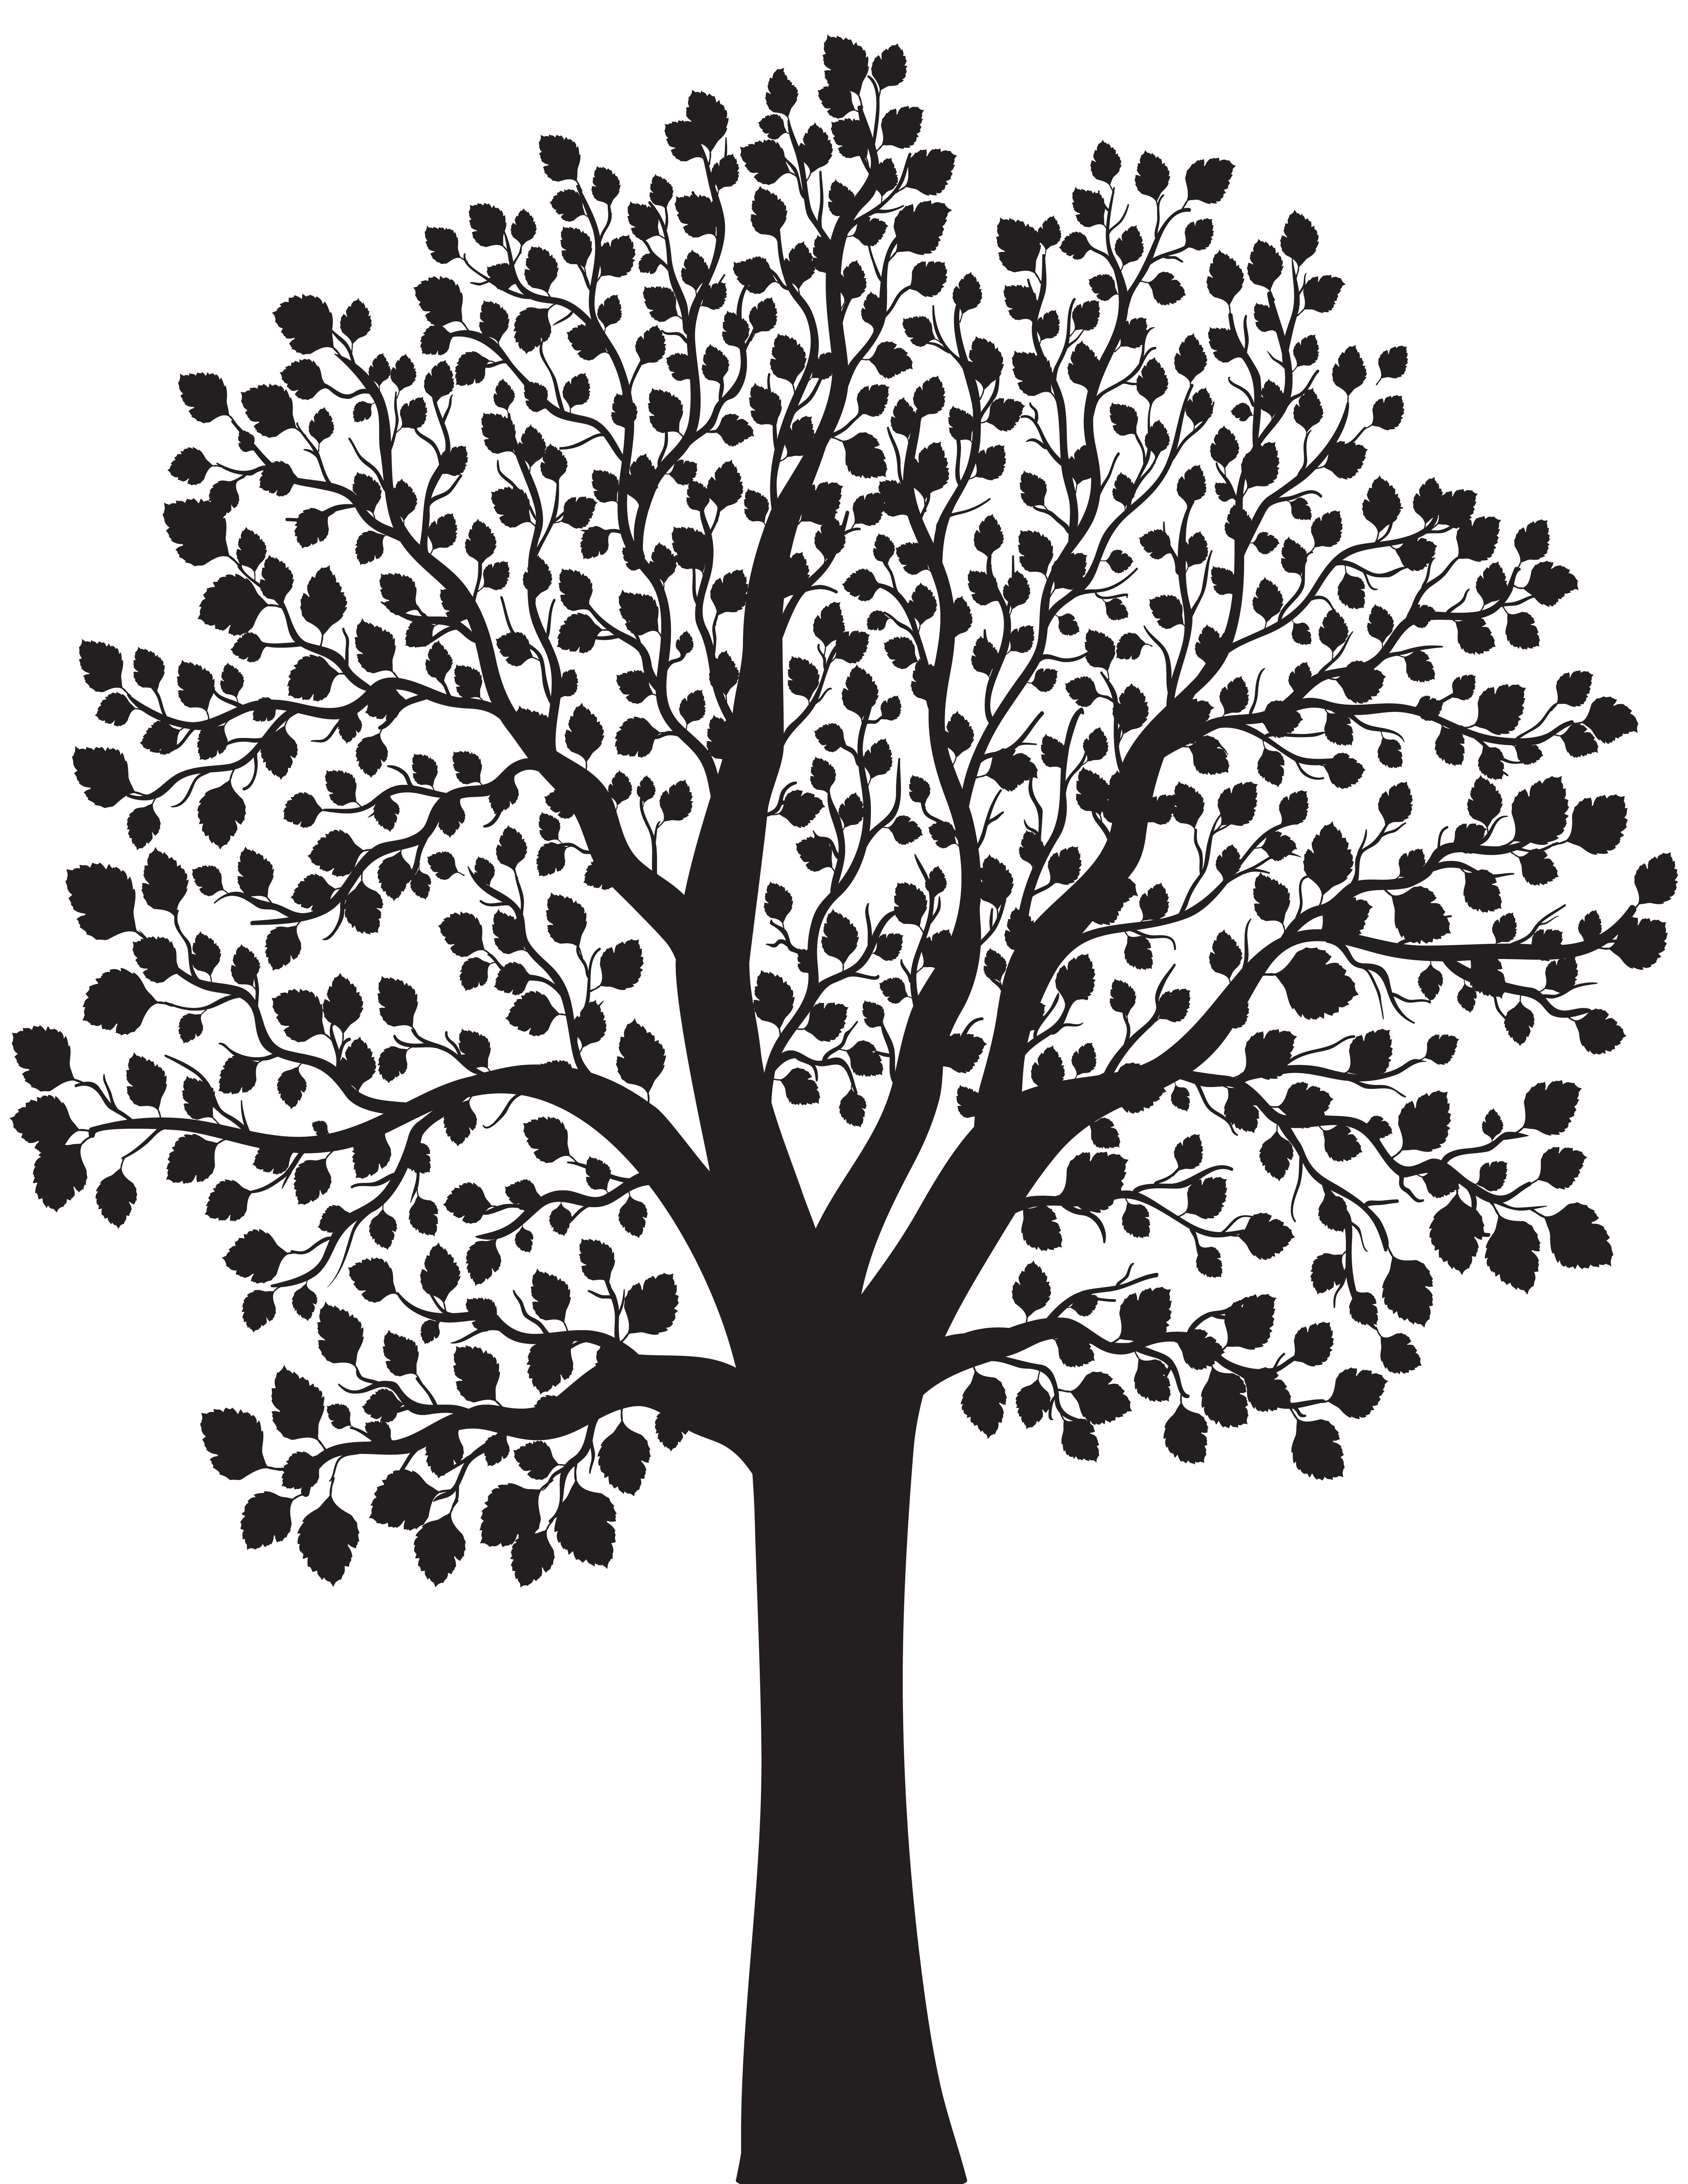 Tree Silhouette Illustration - Tree Silhouette PNG Clip Art Image png